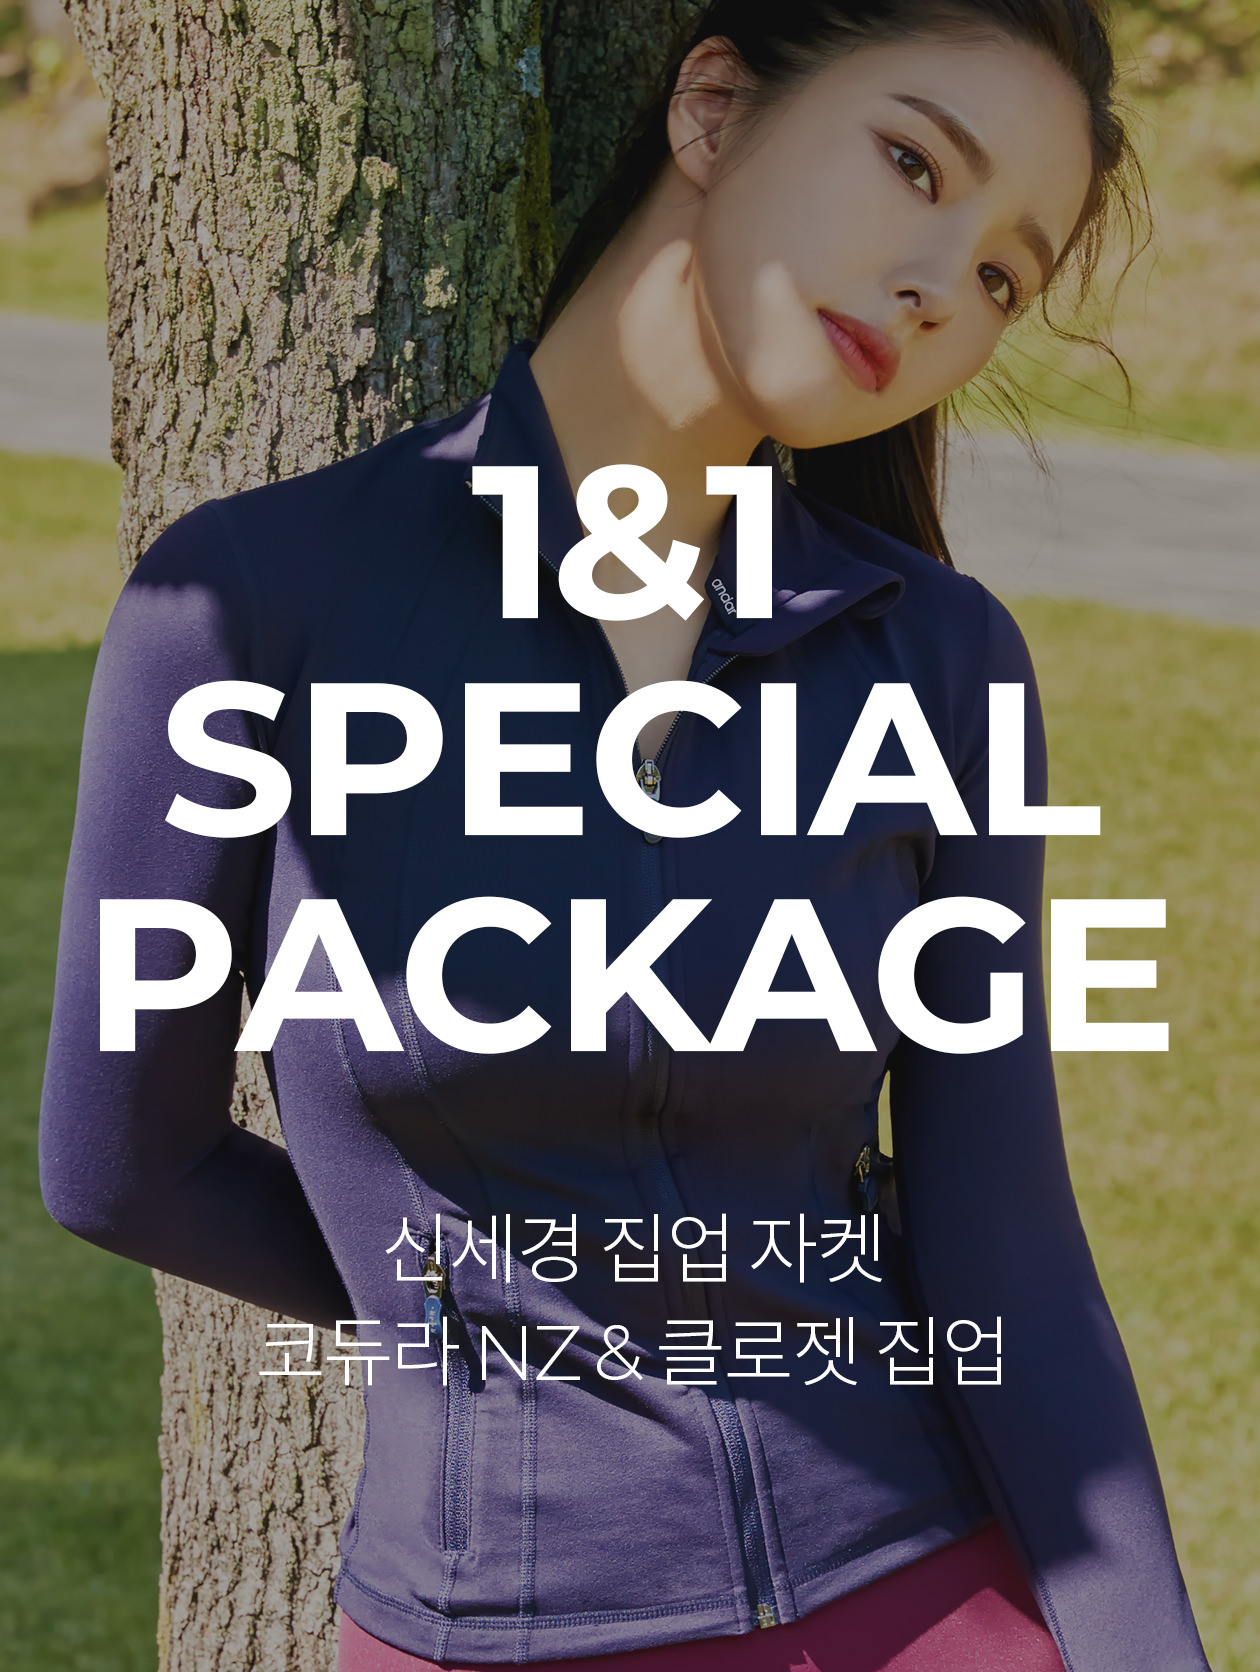 SPECIAL PACKAGE